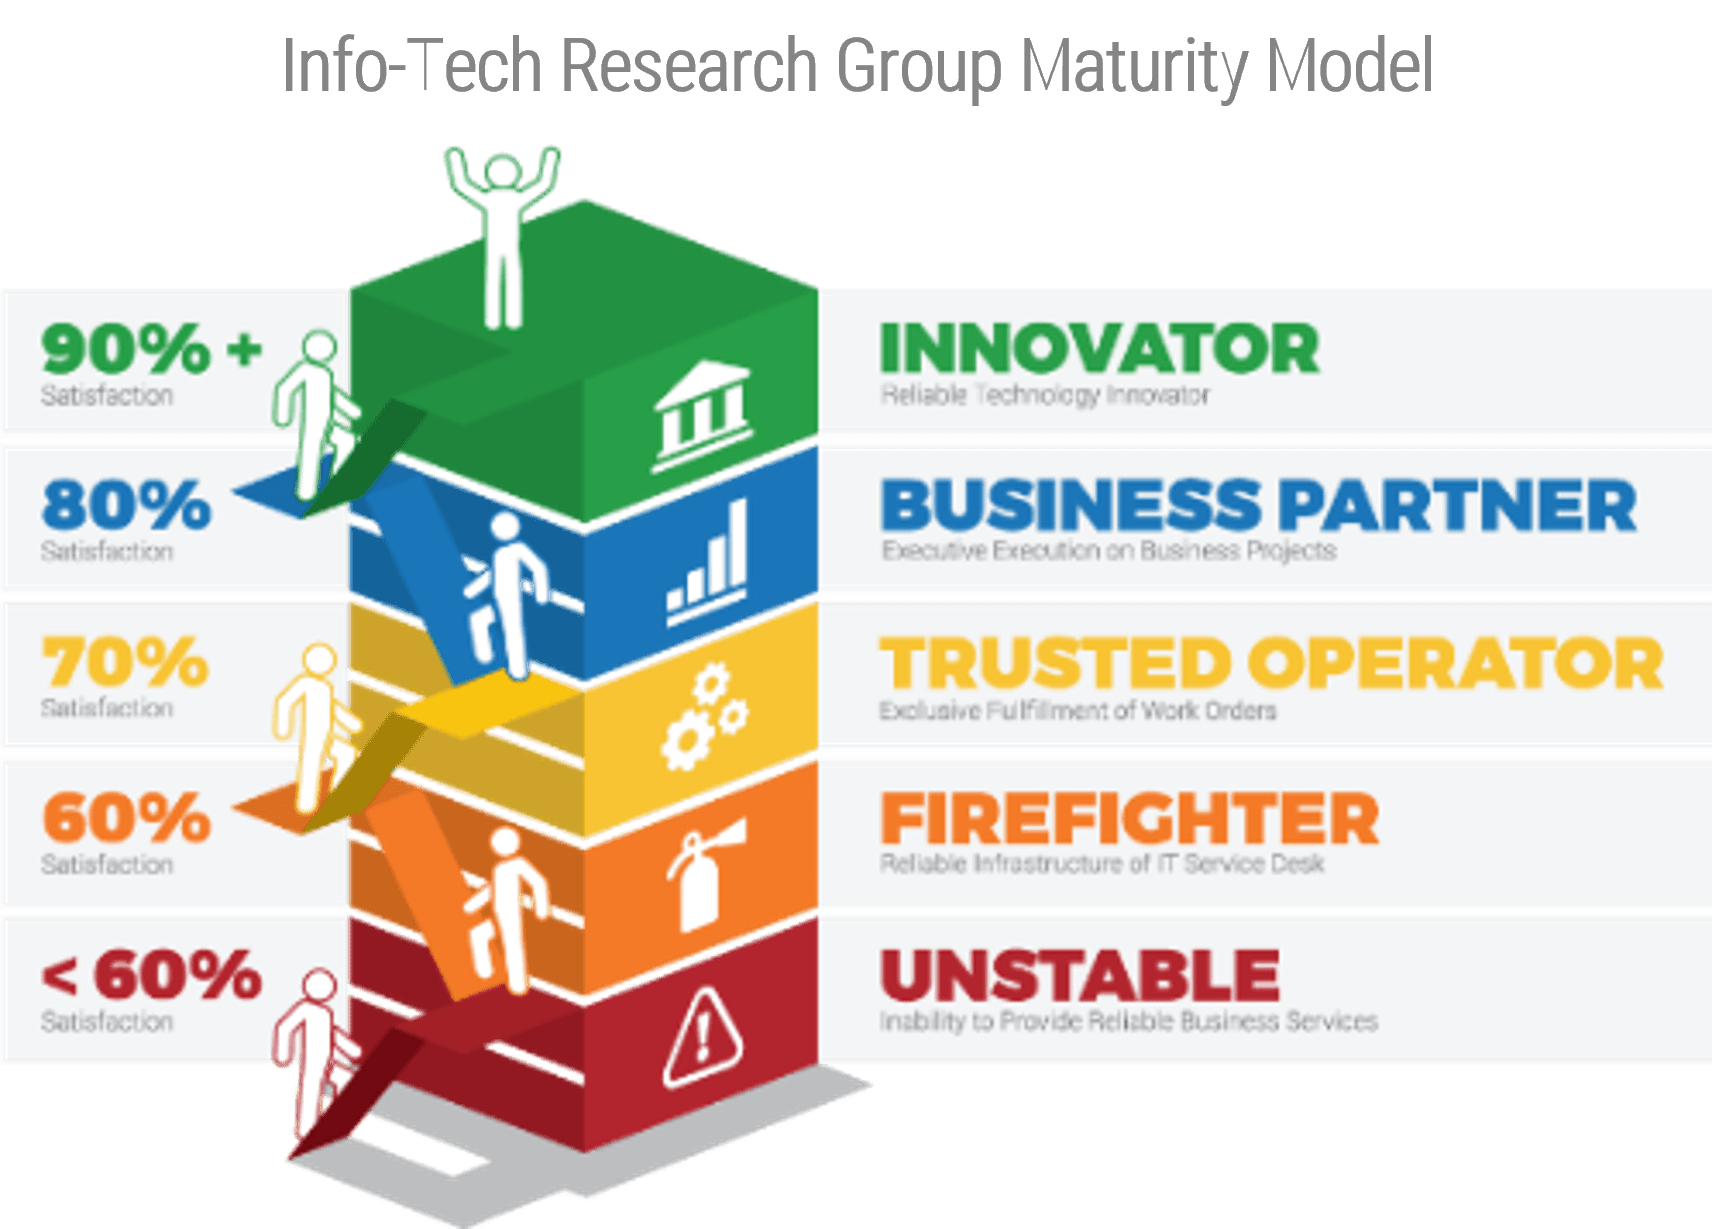 The Info-Tech Reasearch Group Maturity Model, a color-coded tower with five levels 'Unstable', 'Firefighter', 'Trusted Operator', 'Business Partner', and 'Innovator'.